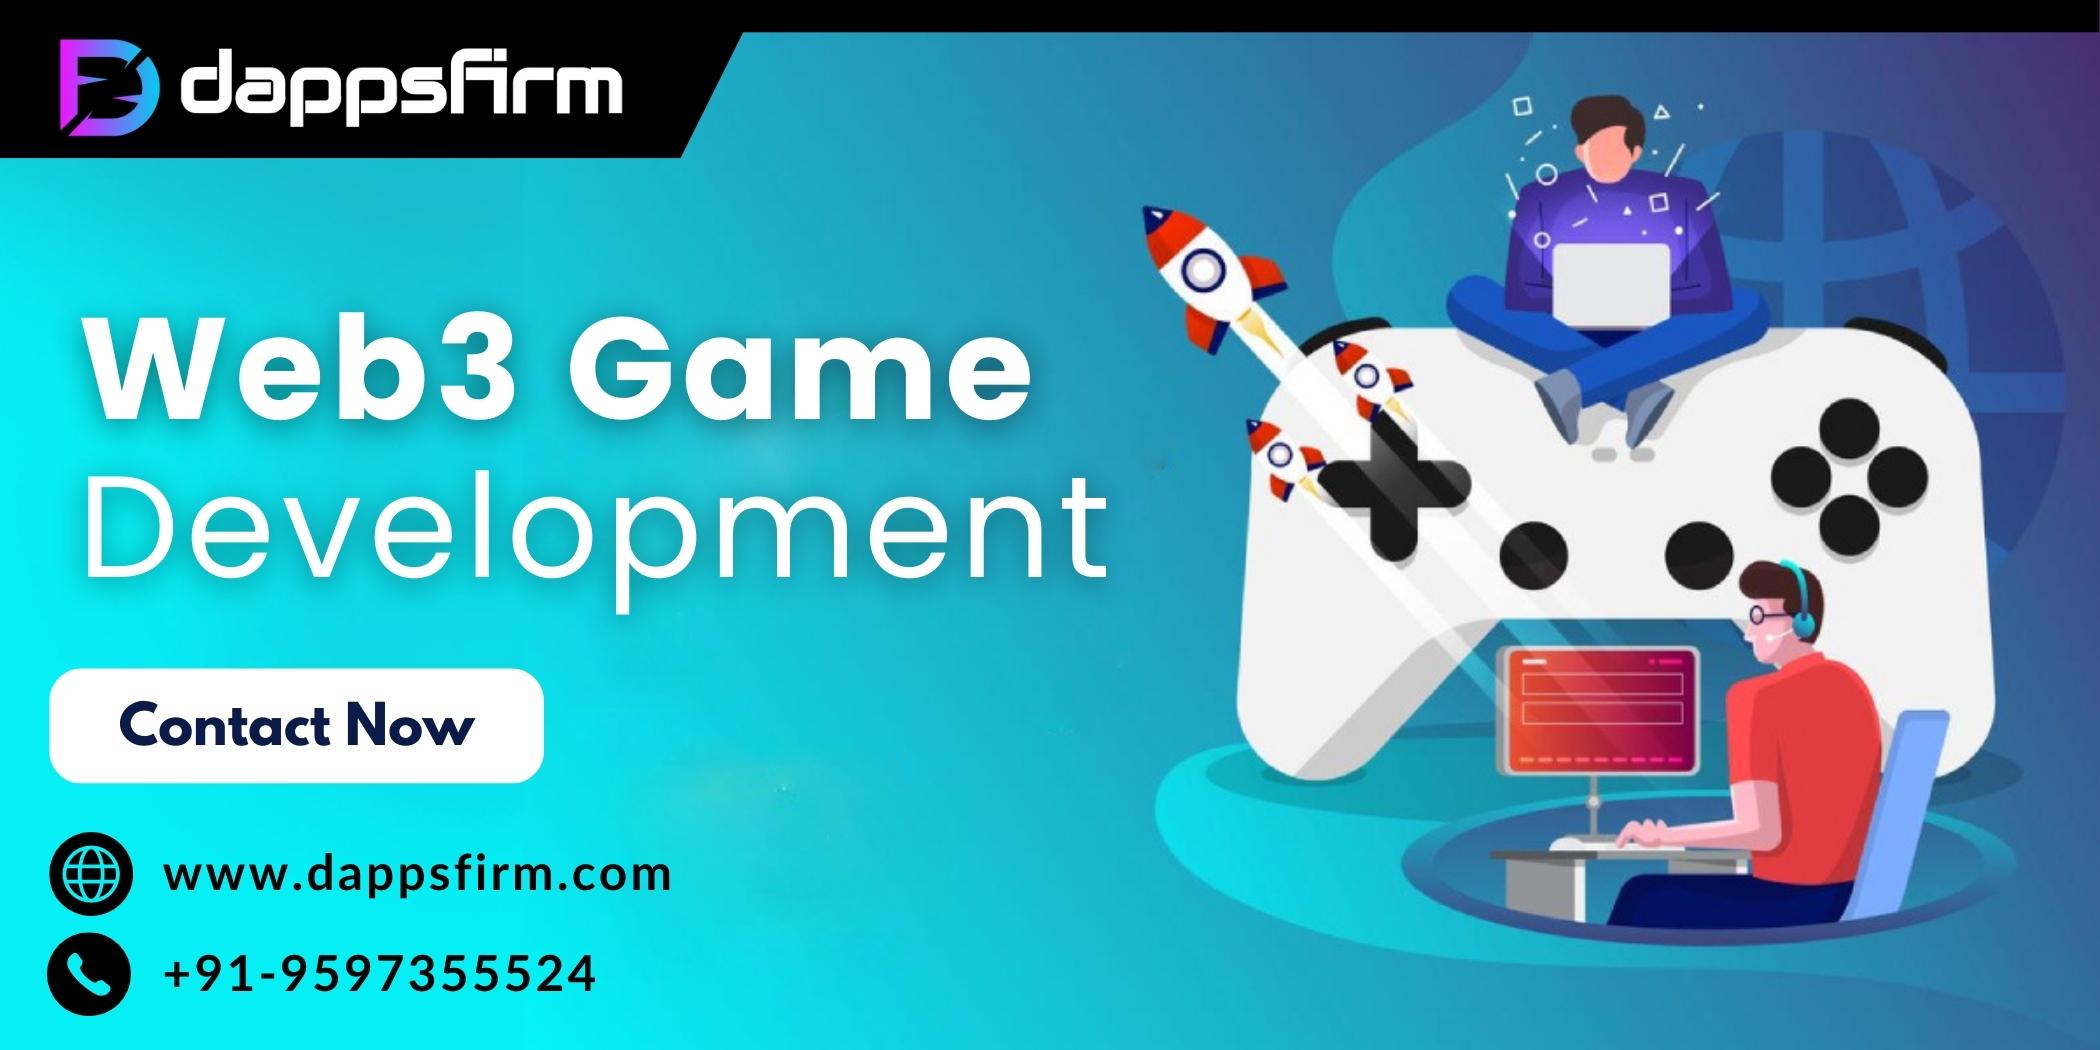 Web3 Game Development To Transform Gaming Industry with Immersive Web3 Experiences